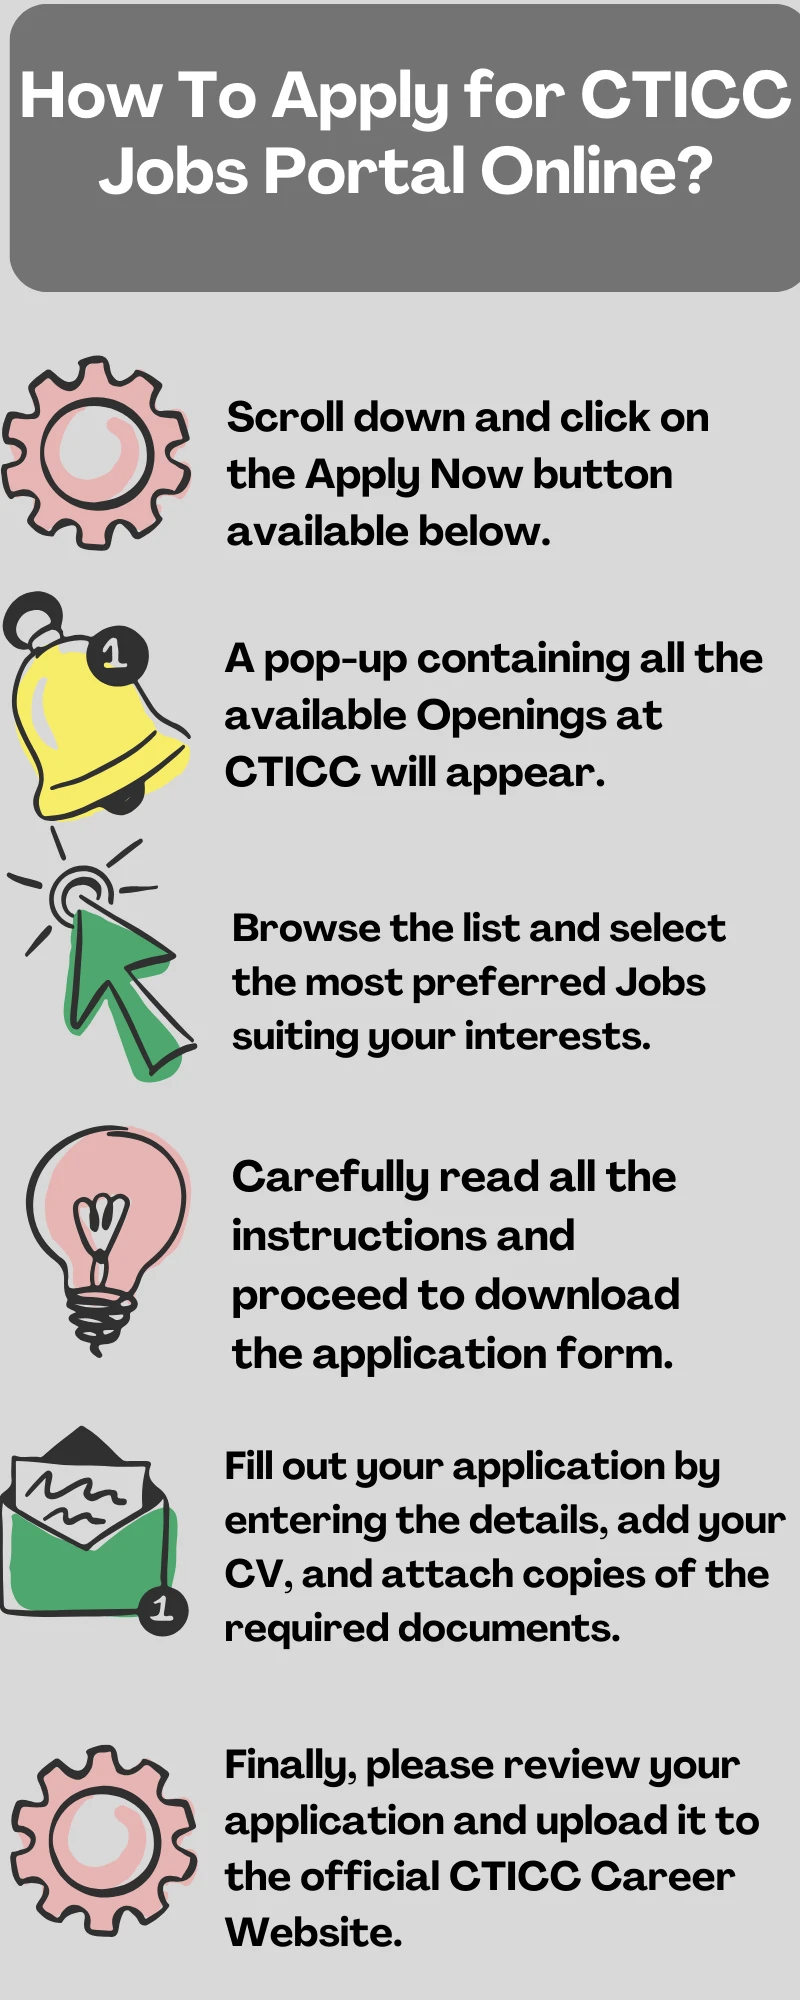 How To Apply for CTICC Jobs Portal Online?